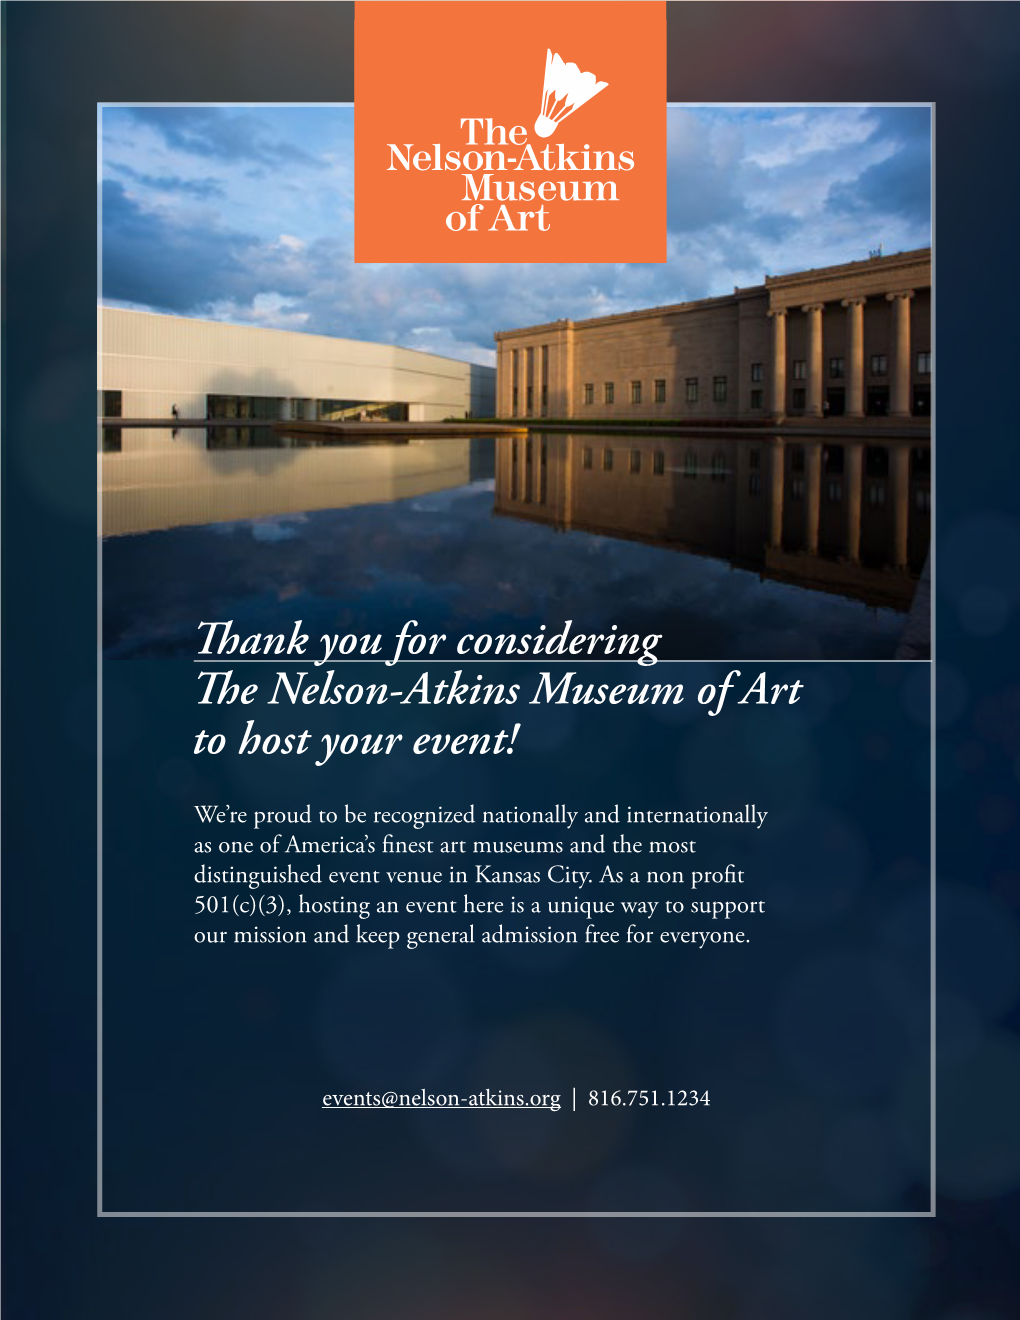 Thank You for Considering the Nelson-Atkins Museum of Art to Host Your Event!